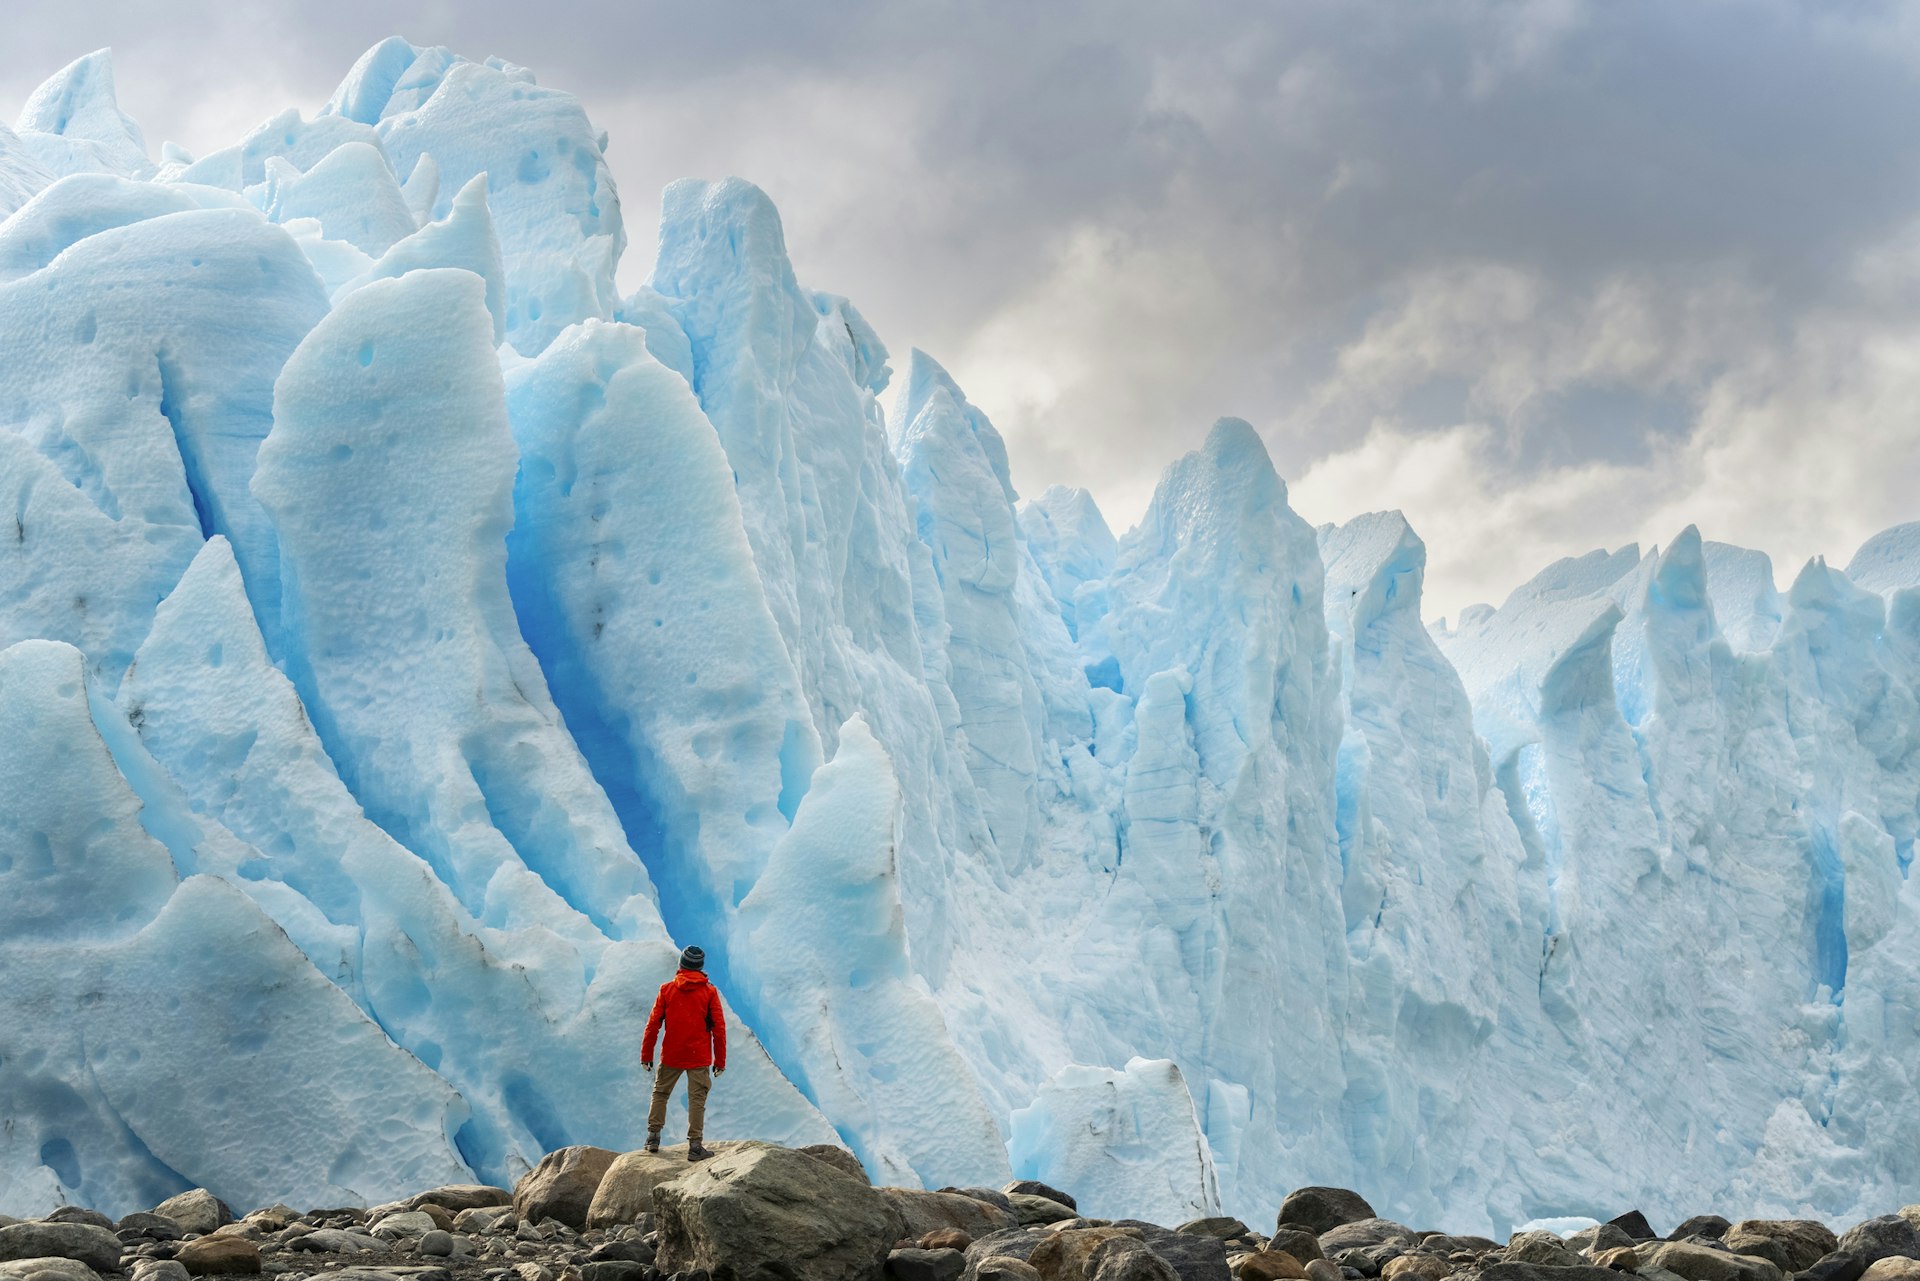 Close-up of a man standing in front of blue ice formations at Perito Moreno, Santa Cruz province, Argentina.